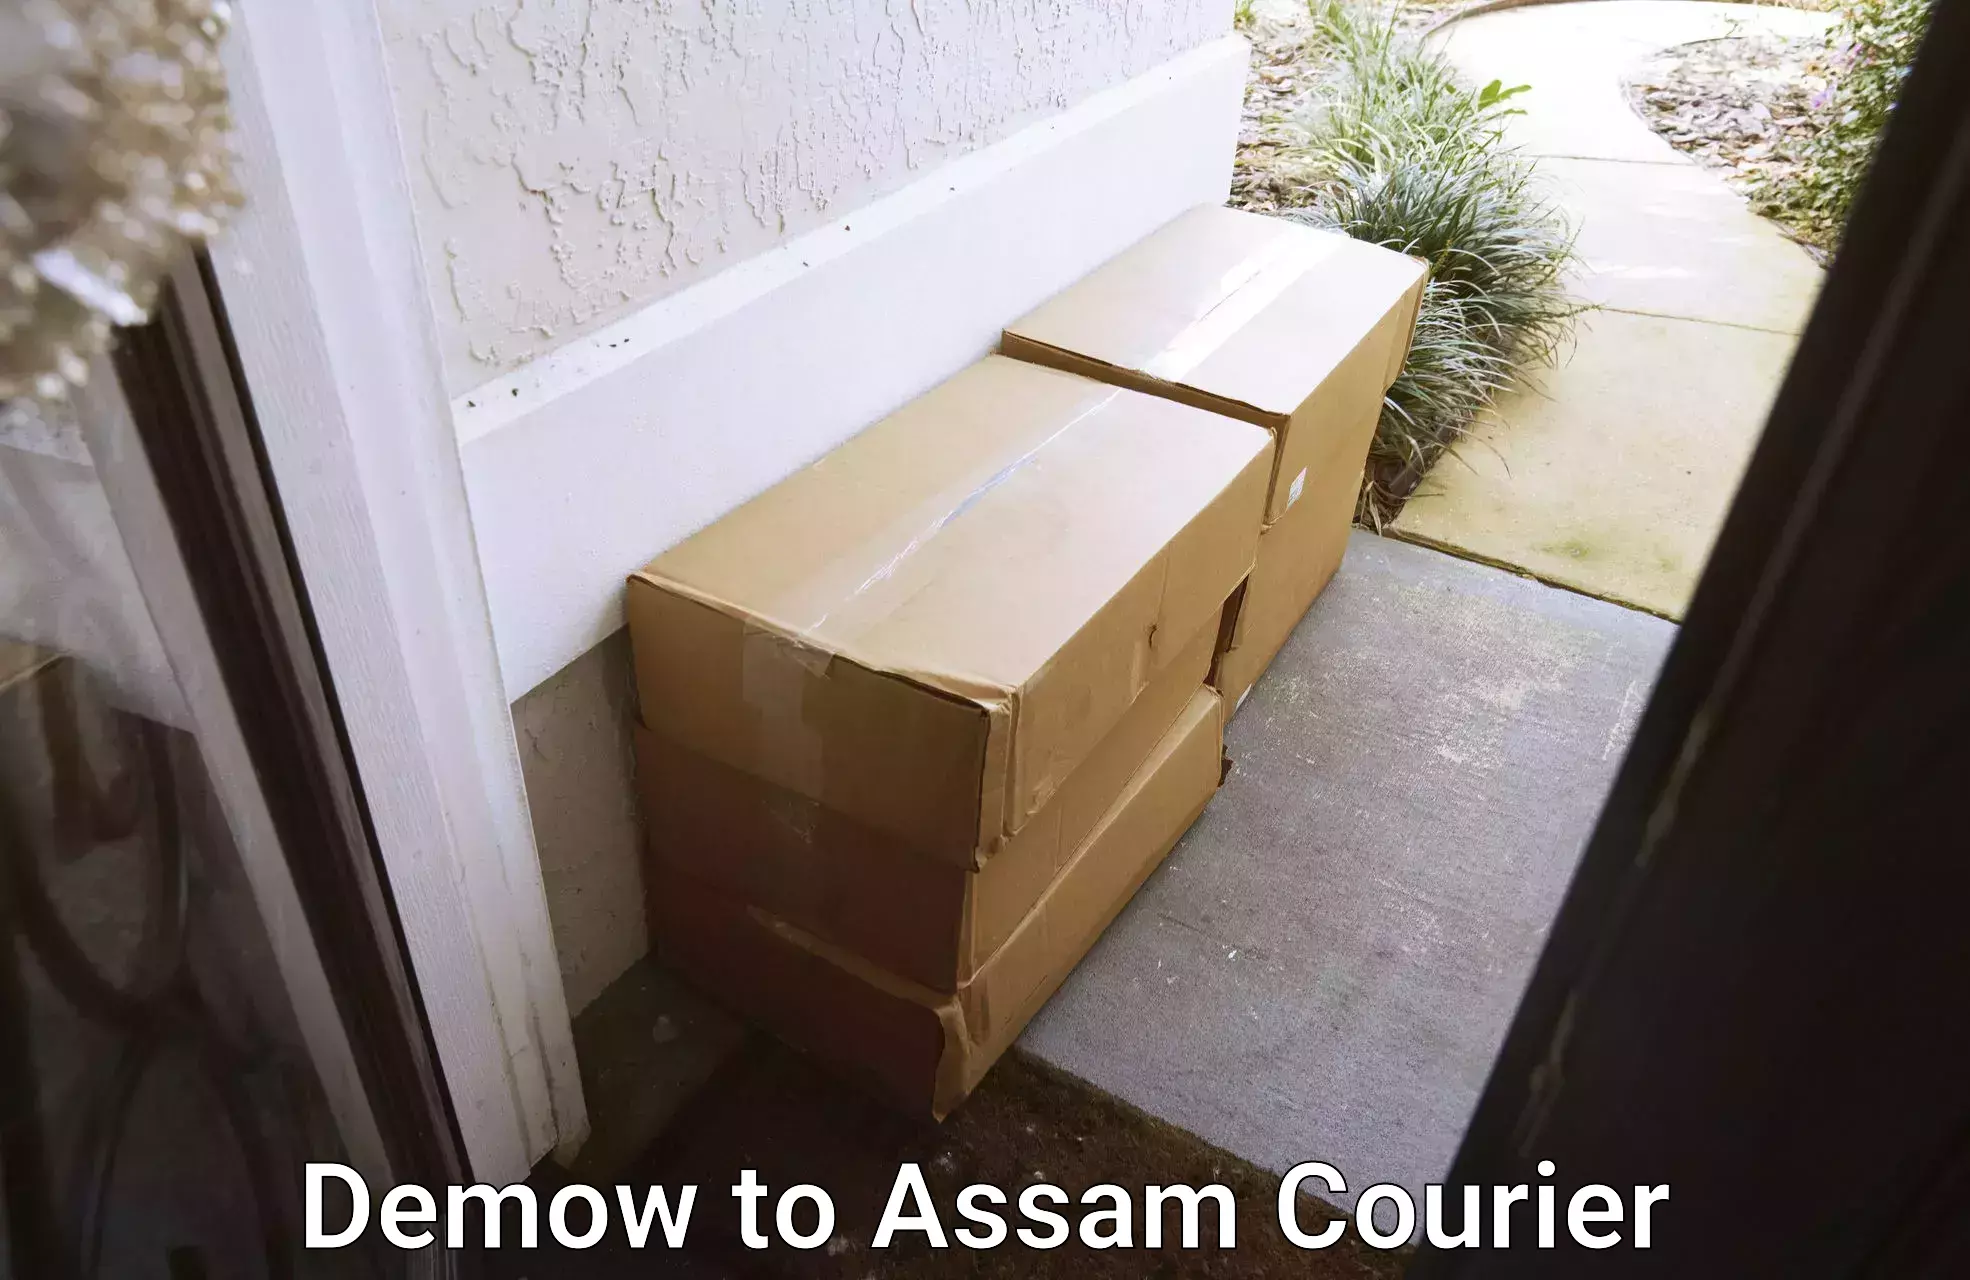 24/7 courier service Demow to Assam